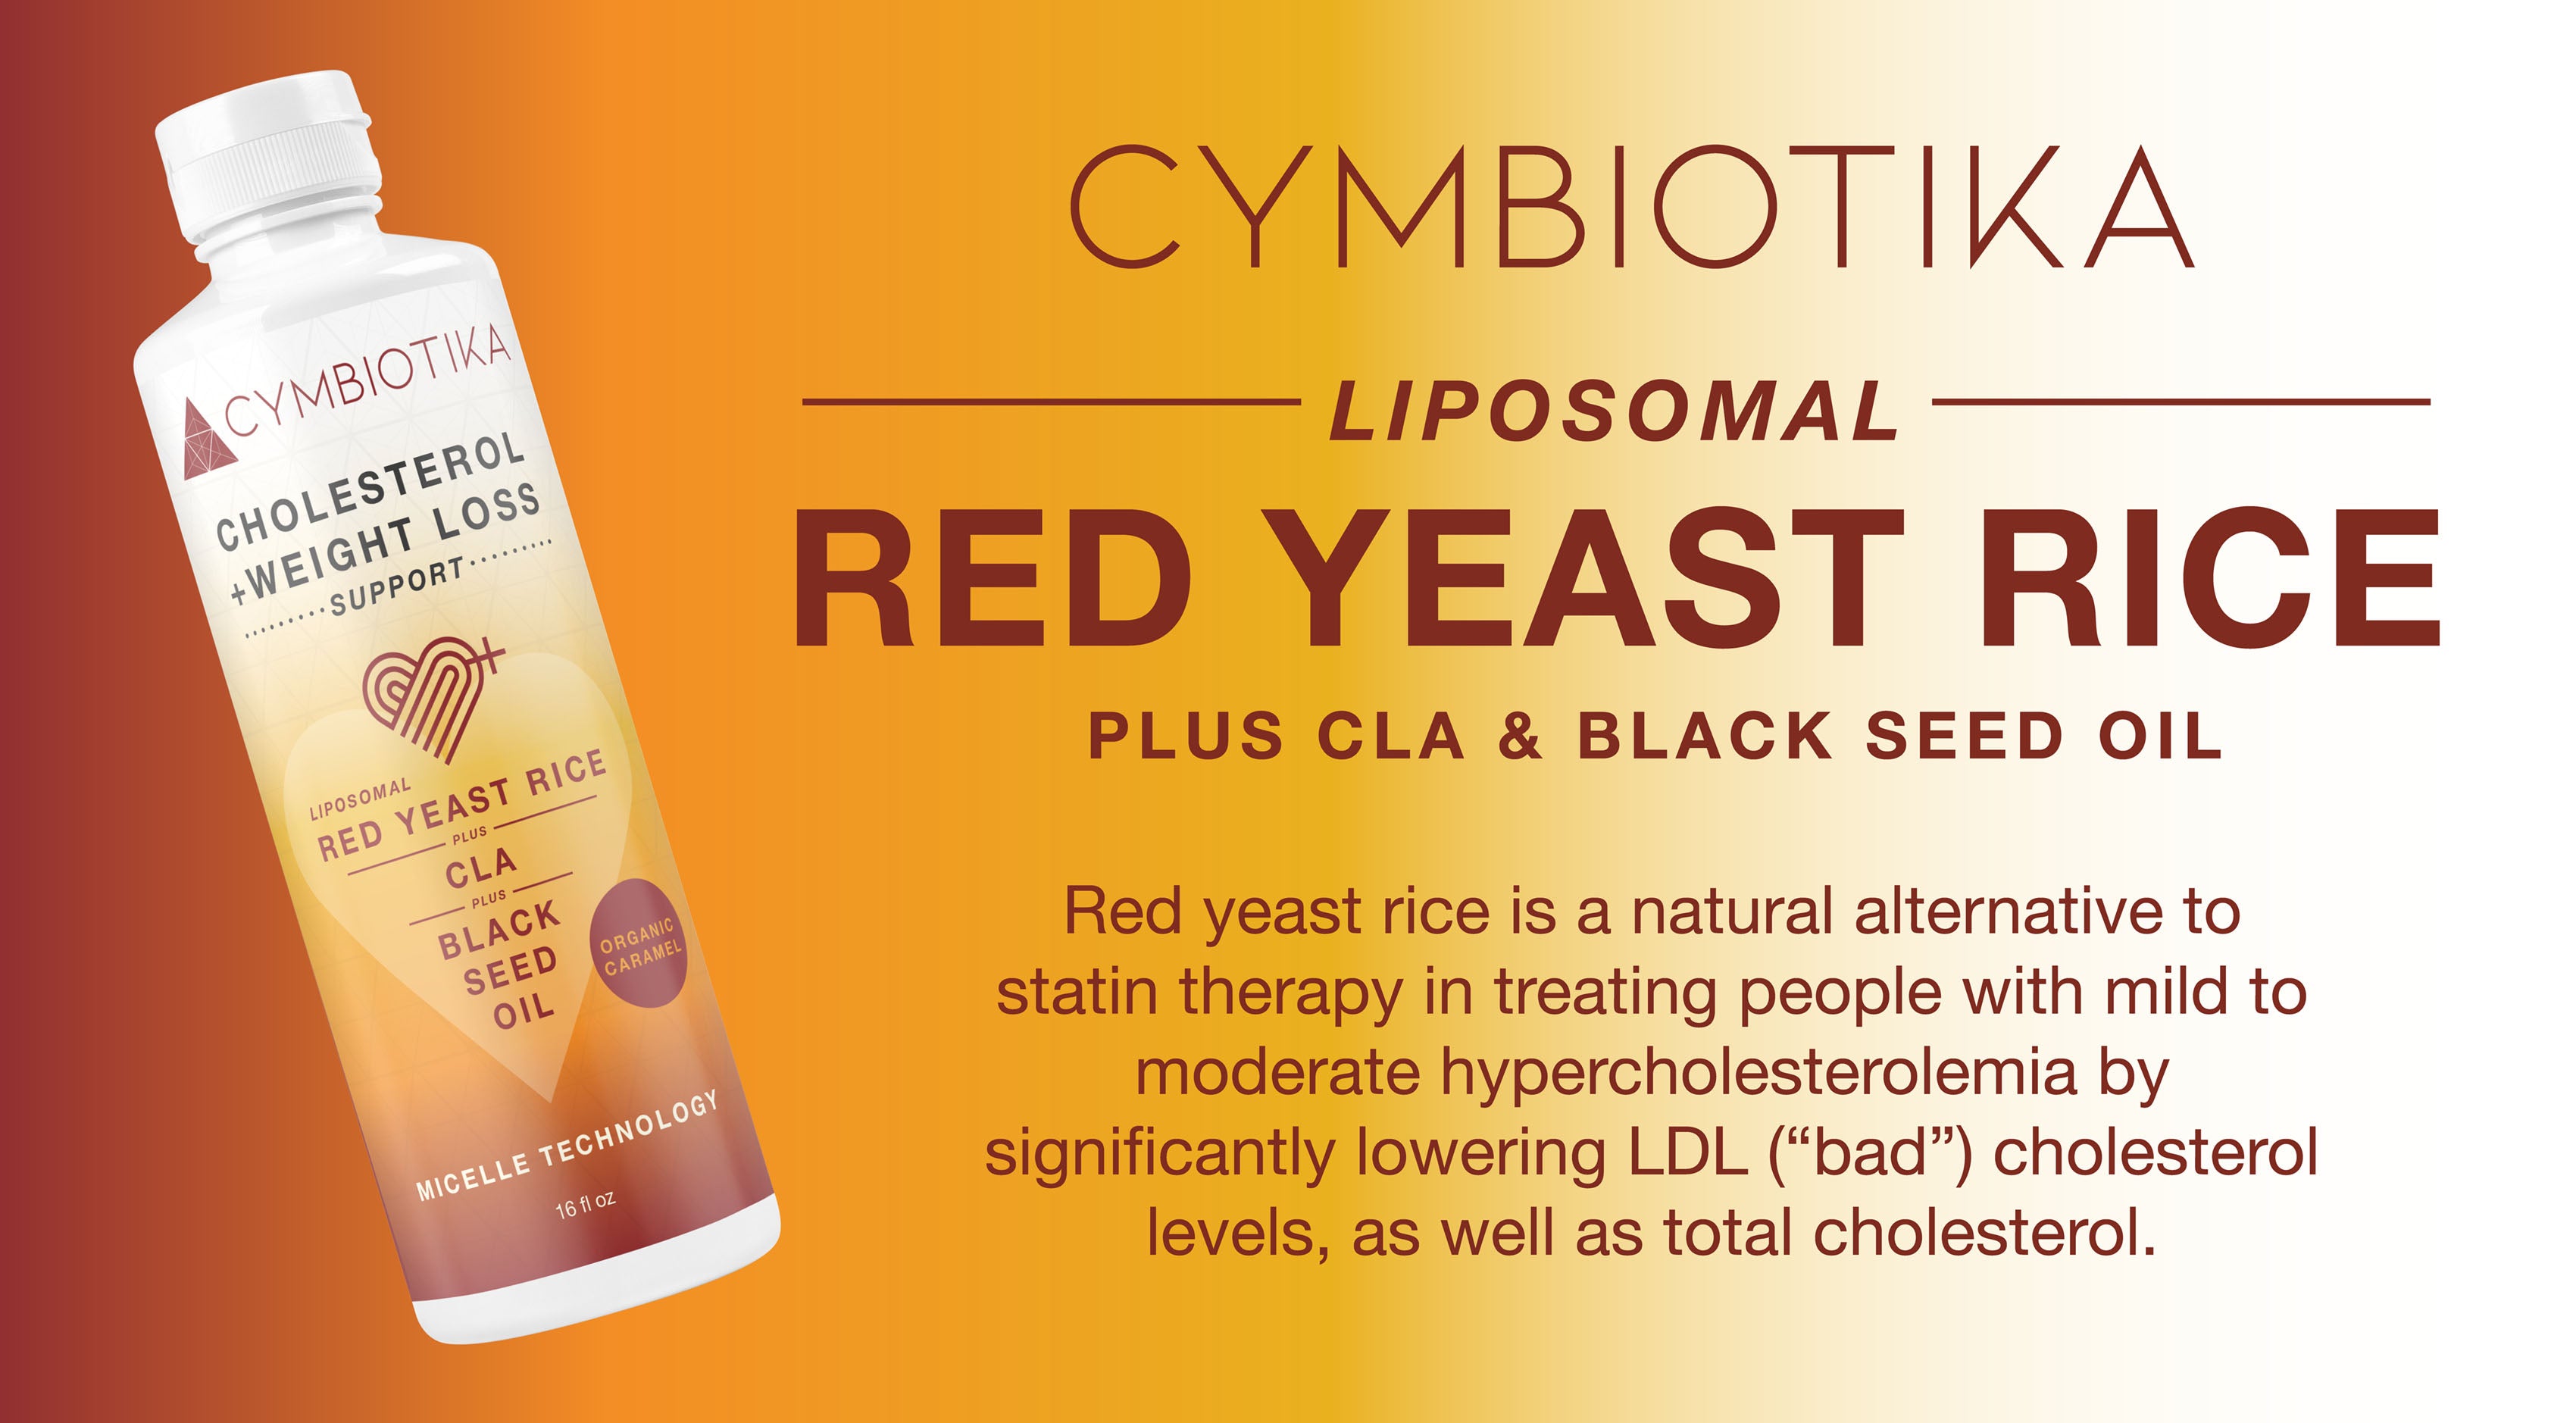 Liposomal Red Yeast Rice plus CLA and Black Seed oil is an alternative to statin therapy for hypercholesterolemia.